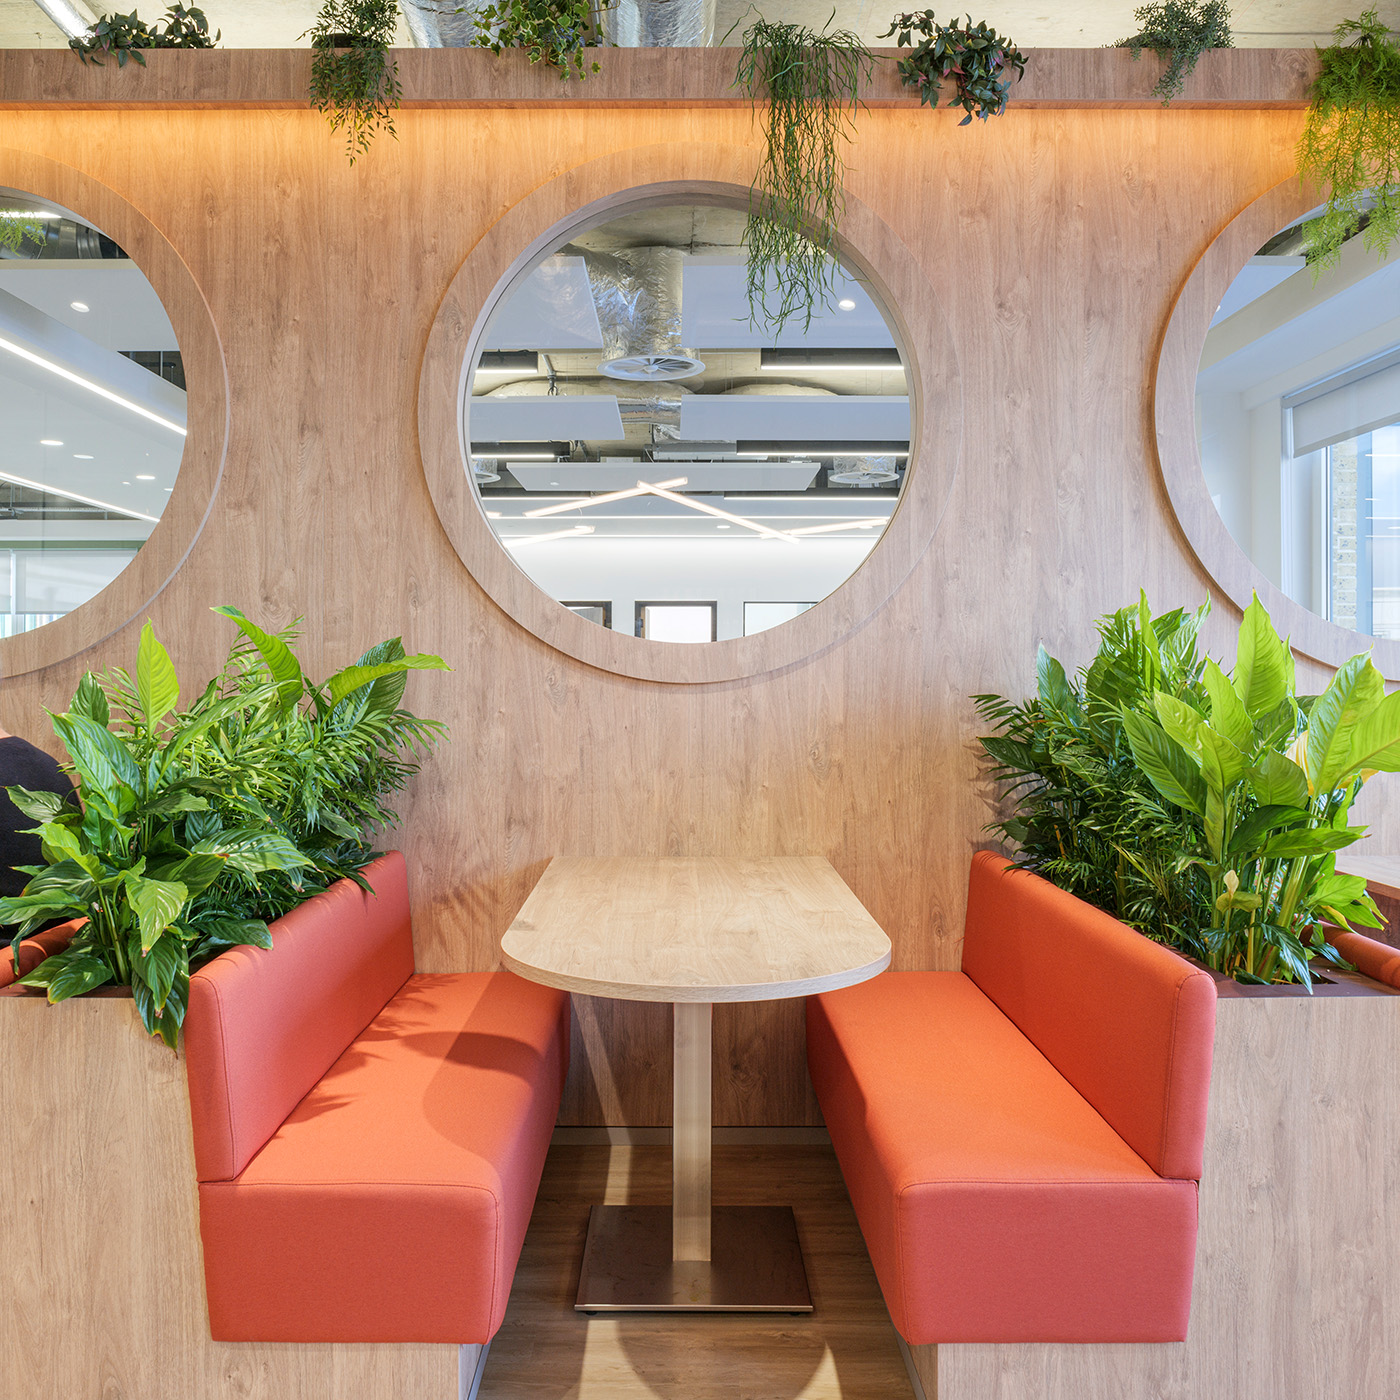 Dedicated meeting rooms, pods and booths